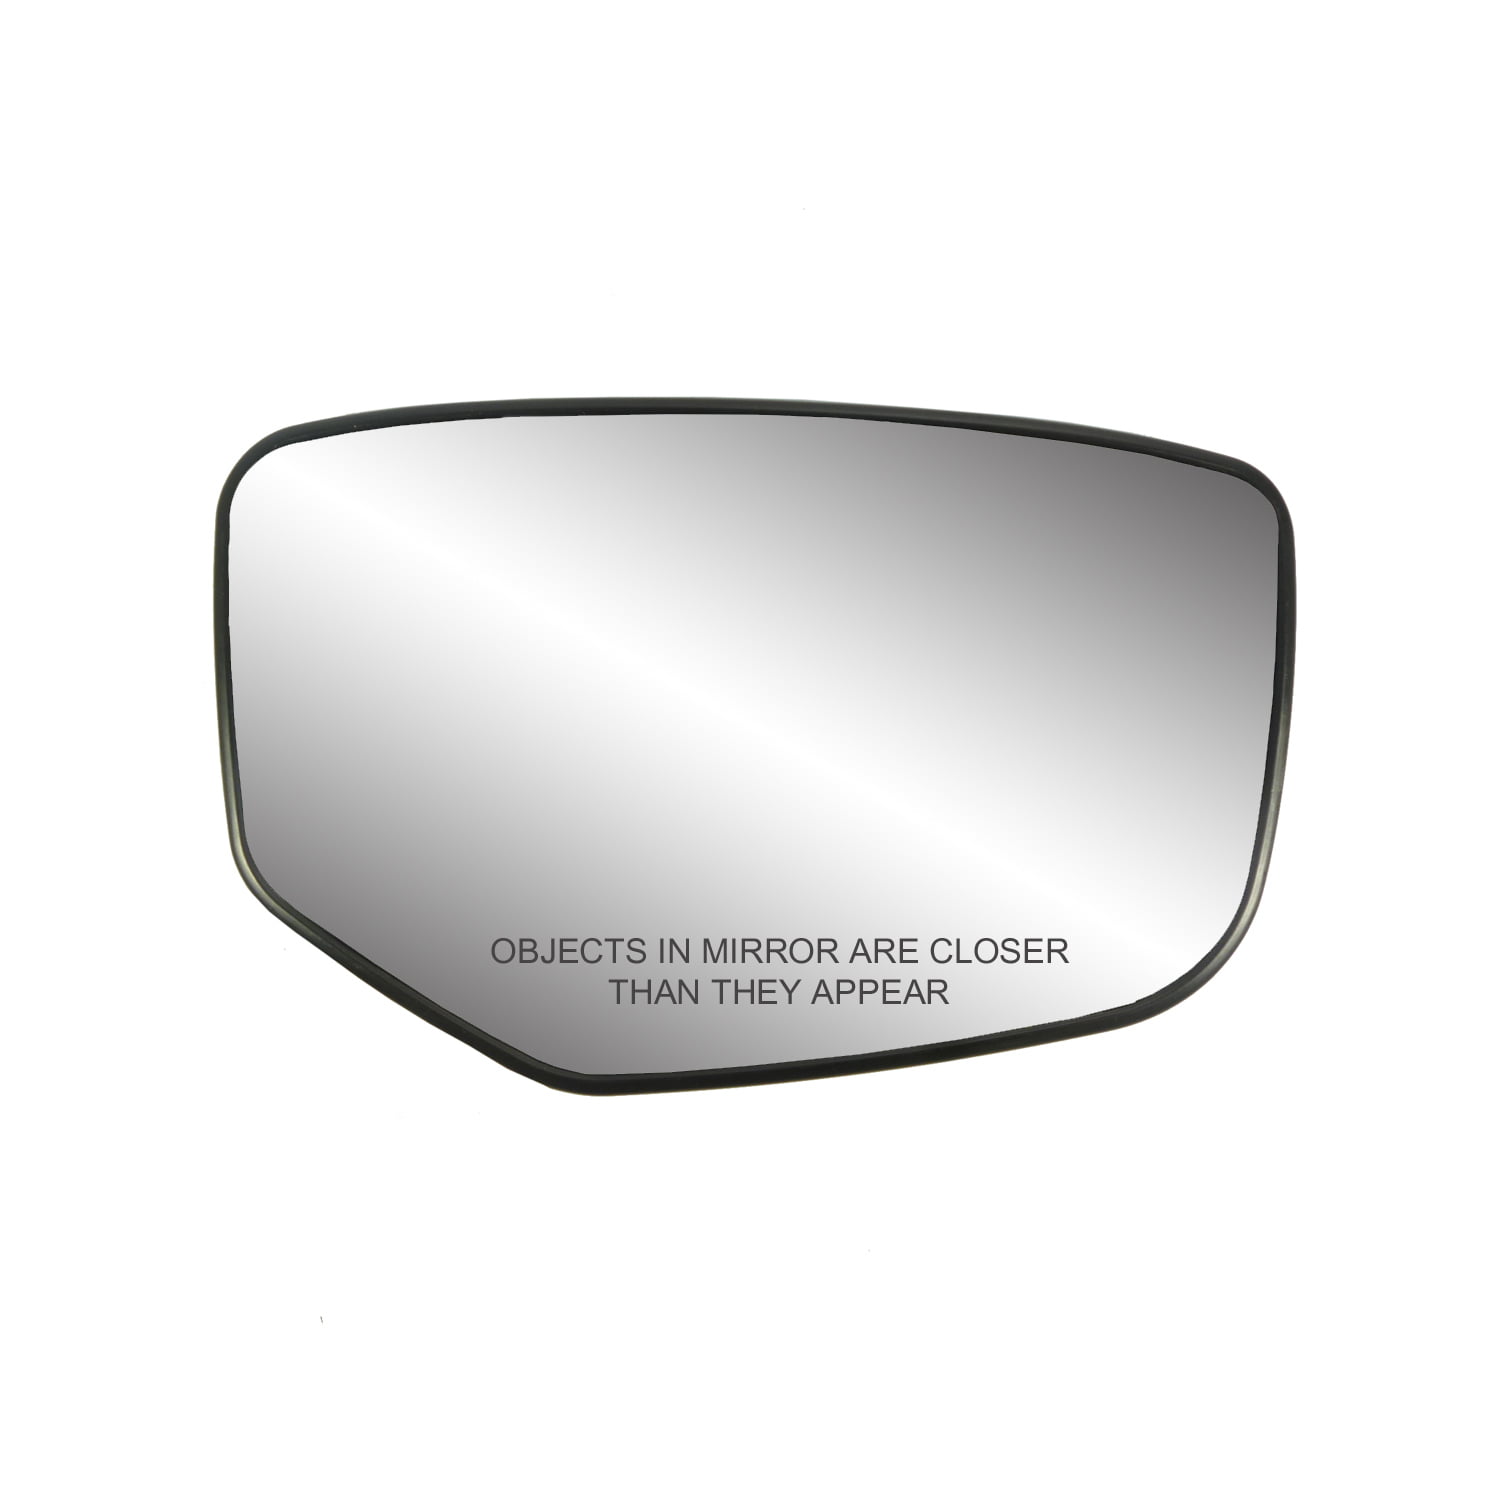 New Replacement Driver Side Mirror Glass W Backing for 2008-2012 Honda Accord 